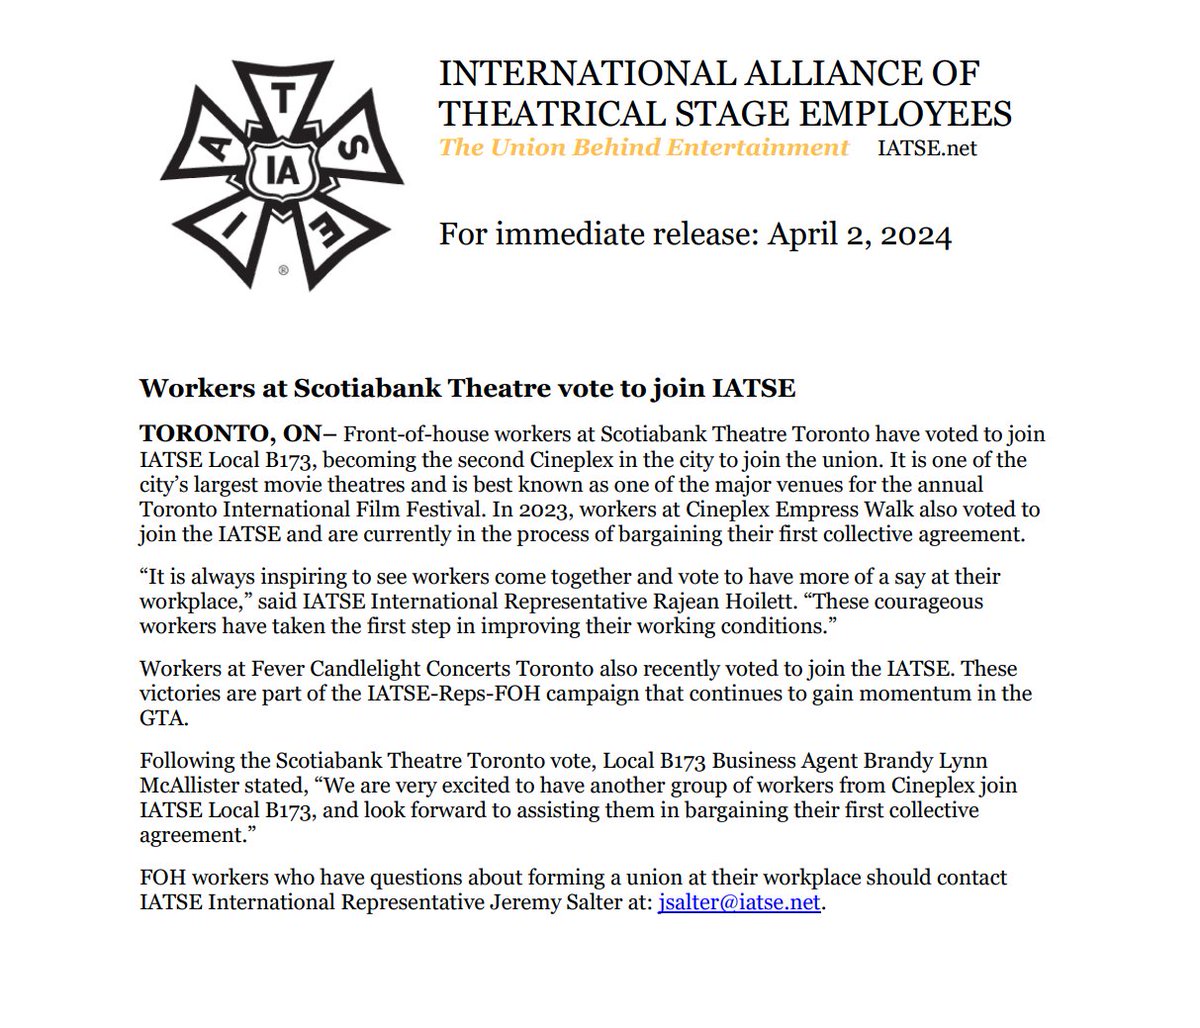 Front-of-house workers at Scotiabank Theatre Toronto have voted to join IATSE Local B173, becoming the 2nd Cineplex in the city to join the #union. Congratulations & welcome to the @IATSE family! #Solidarity #StrongerTogether #UnionStrong Communique here: shorturl.at/JMPQZ